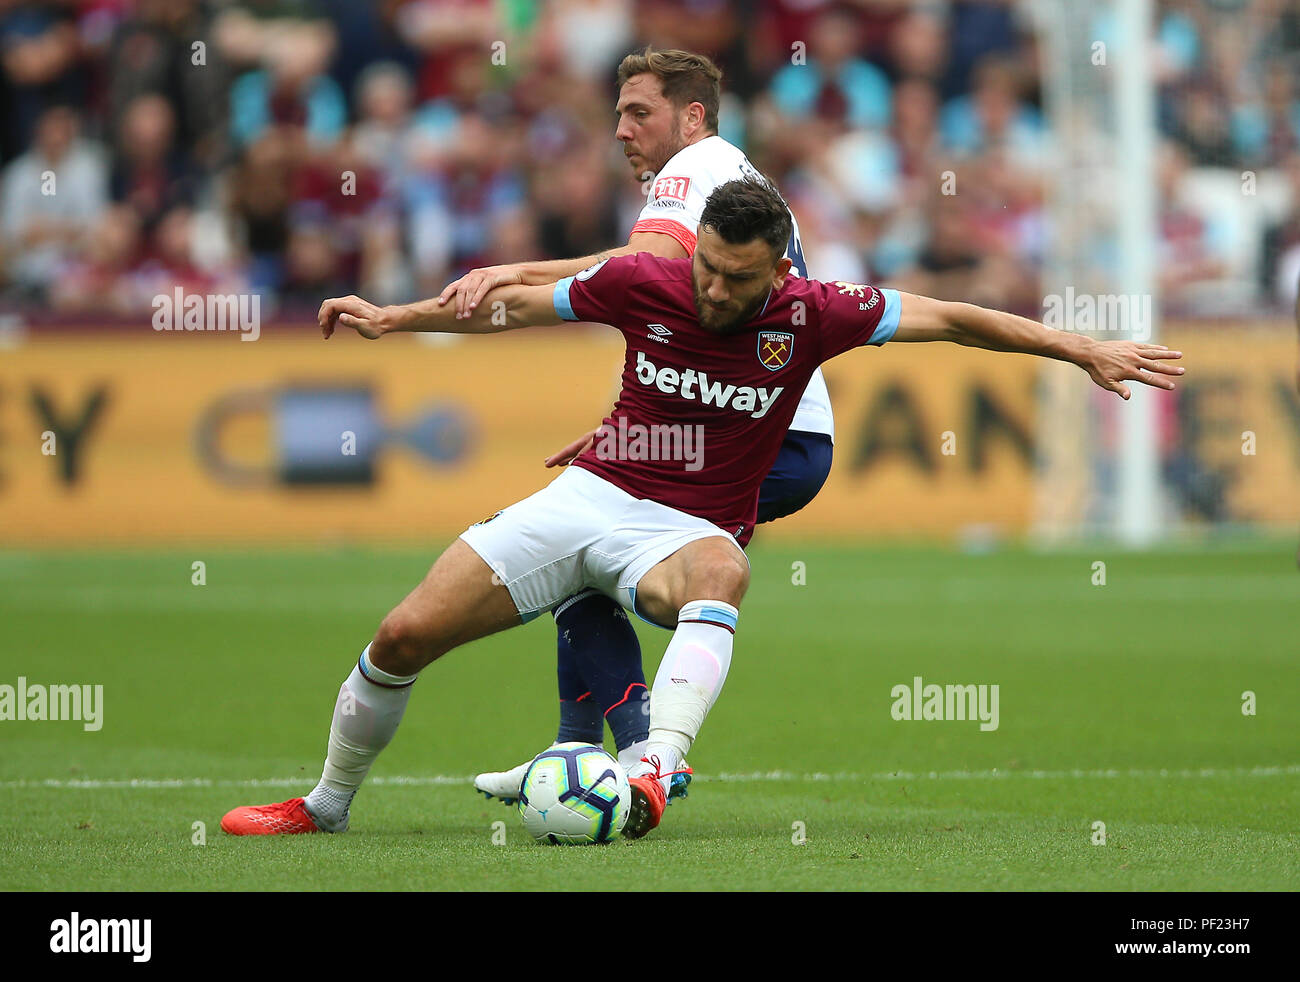 Bournemouth's Dan Gosling and West Ham United's Robert Snodgrass (left) battle for the ball during the Premier League match at London Stadium. Stock Photo